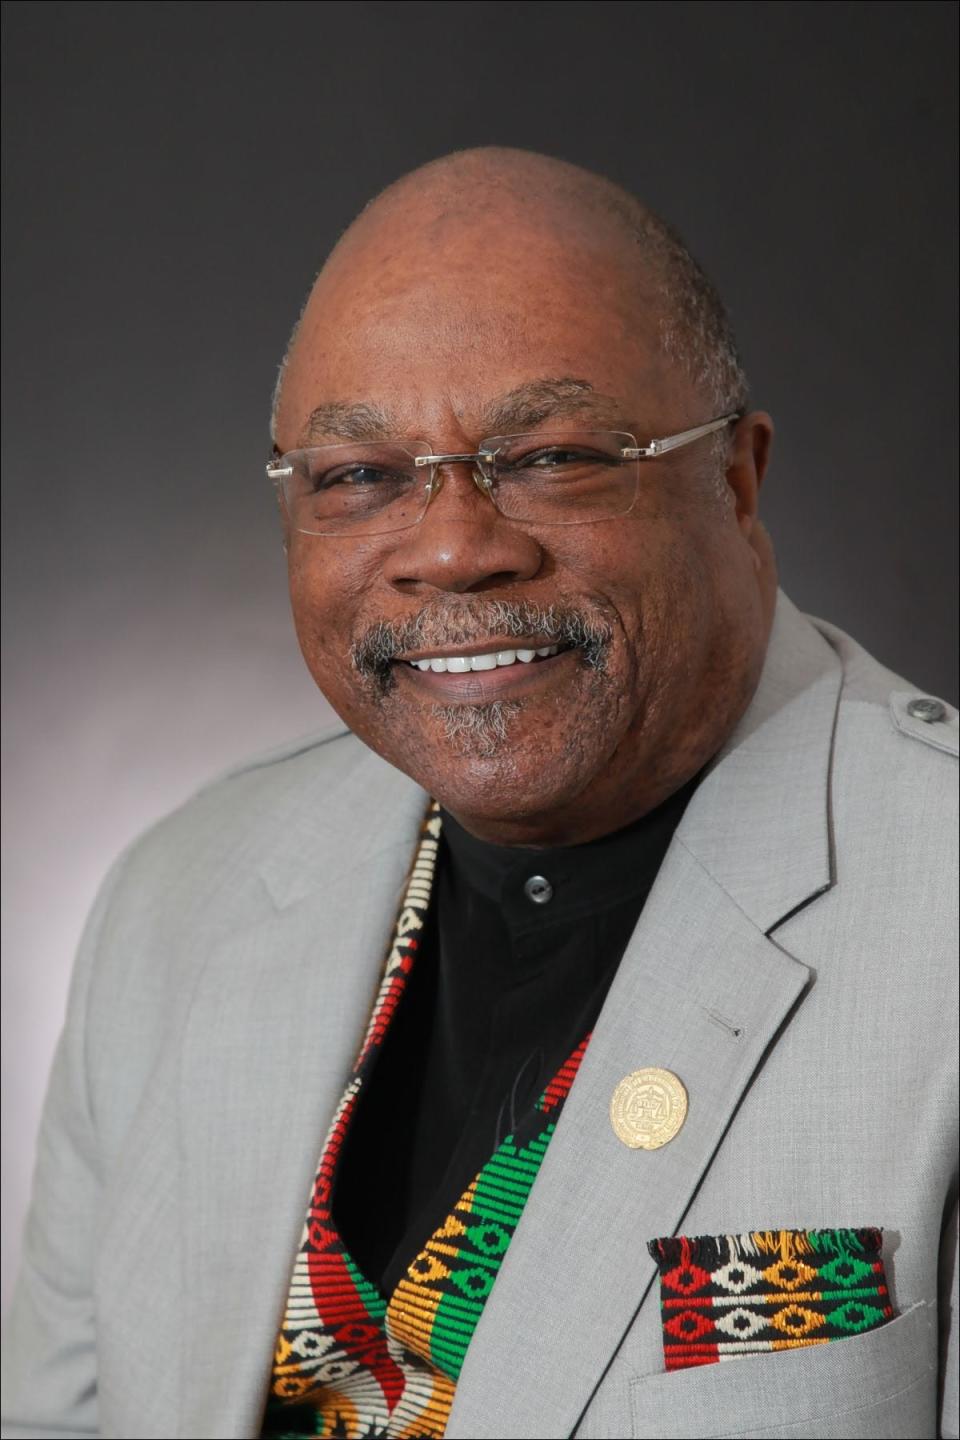 The Rev. Wendell Anthony, president of the Detroit Branch of the NAACP.